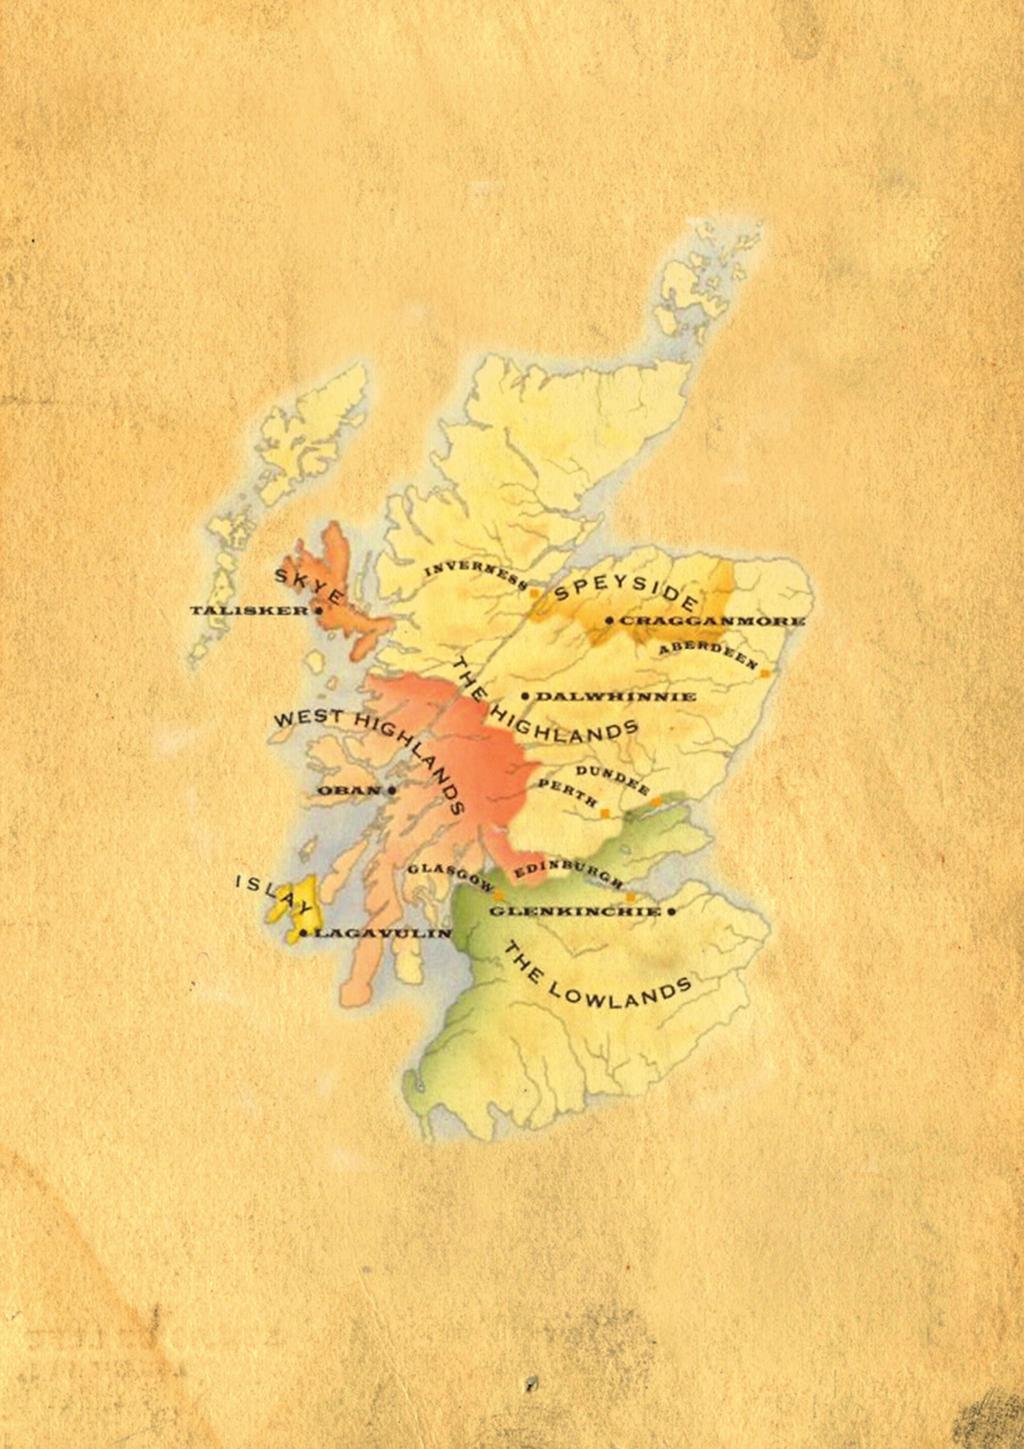 Whisky Regions of Scotland Map of Scotland showing the